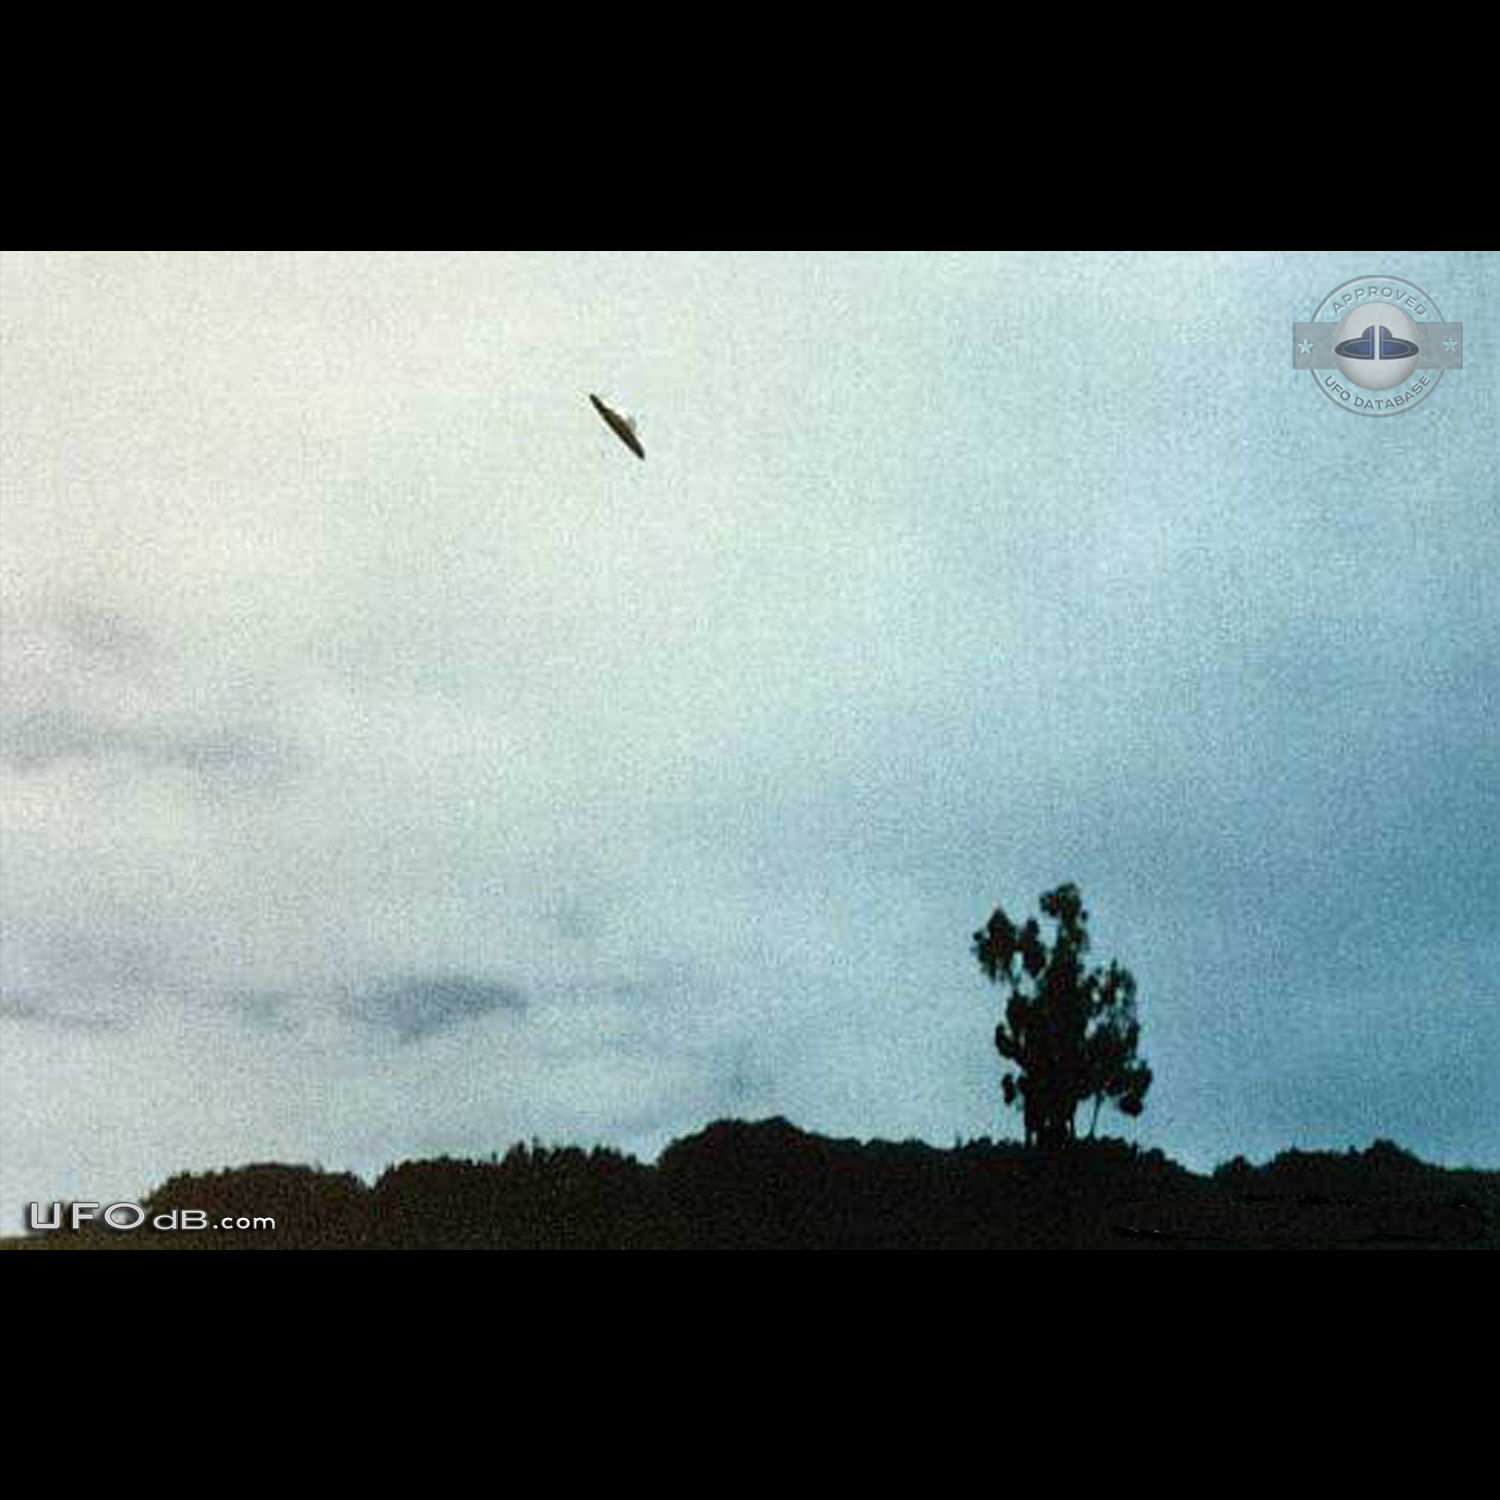 1967 Peru UFO sighting caught on pictures Huaylas Valley Yungay Ancash UFO Picture #440-1